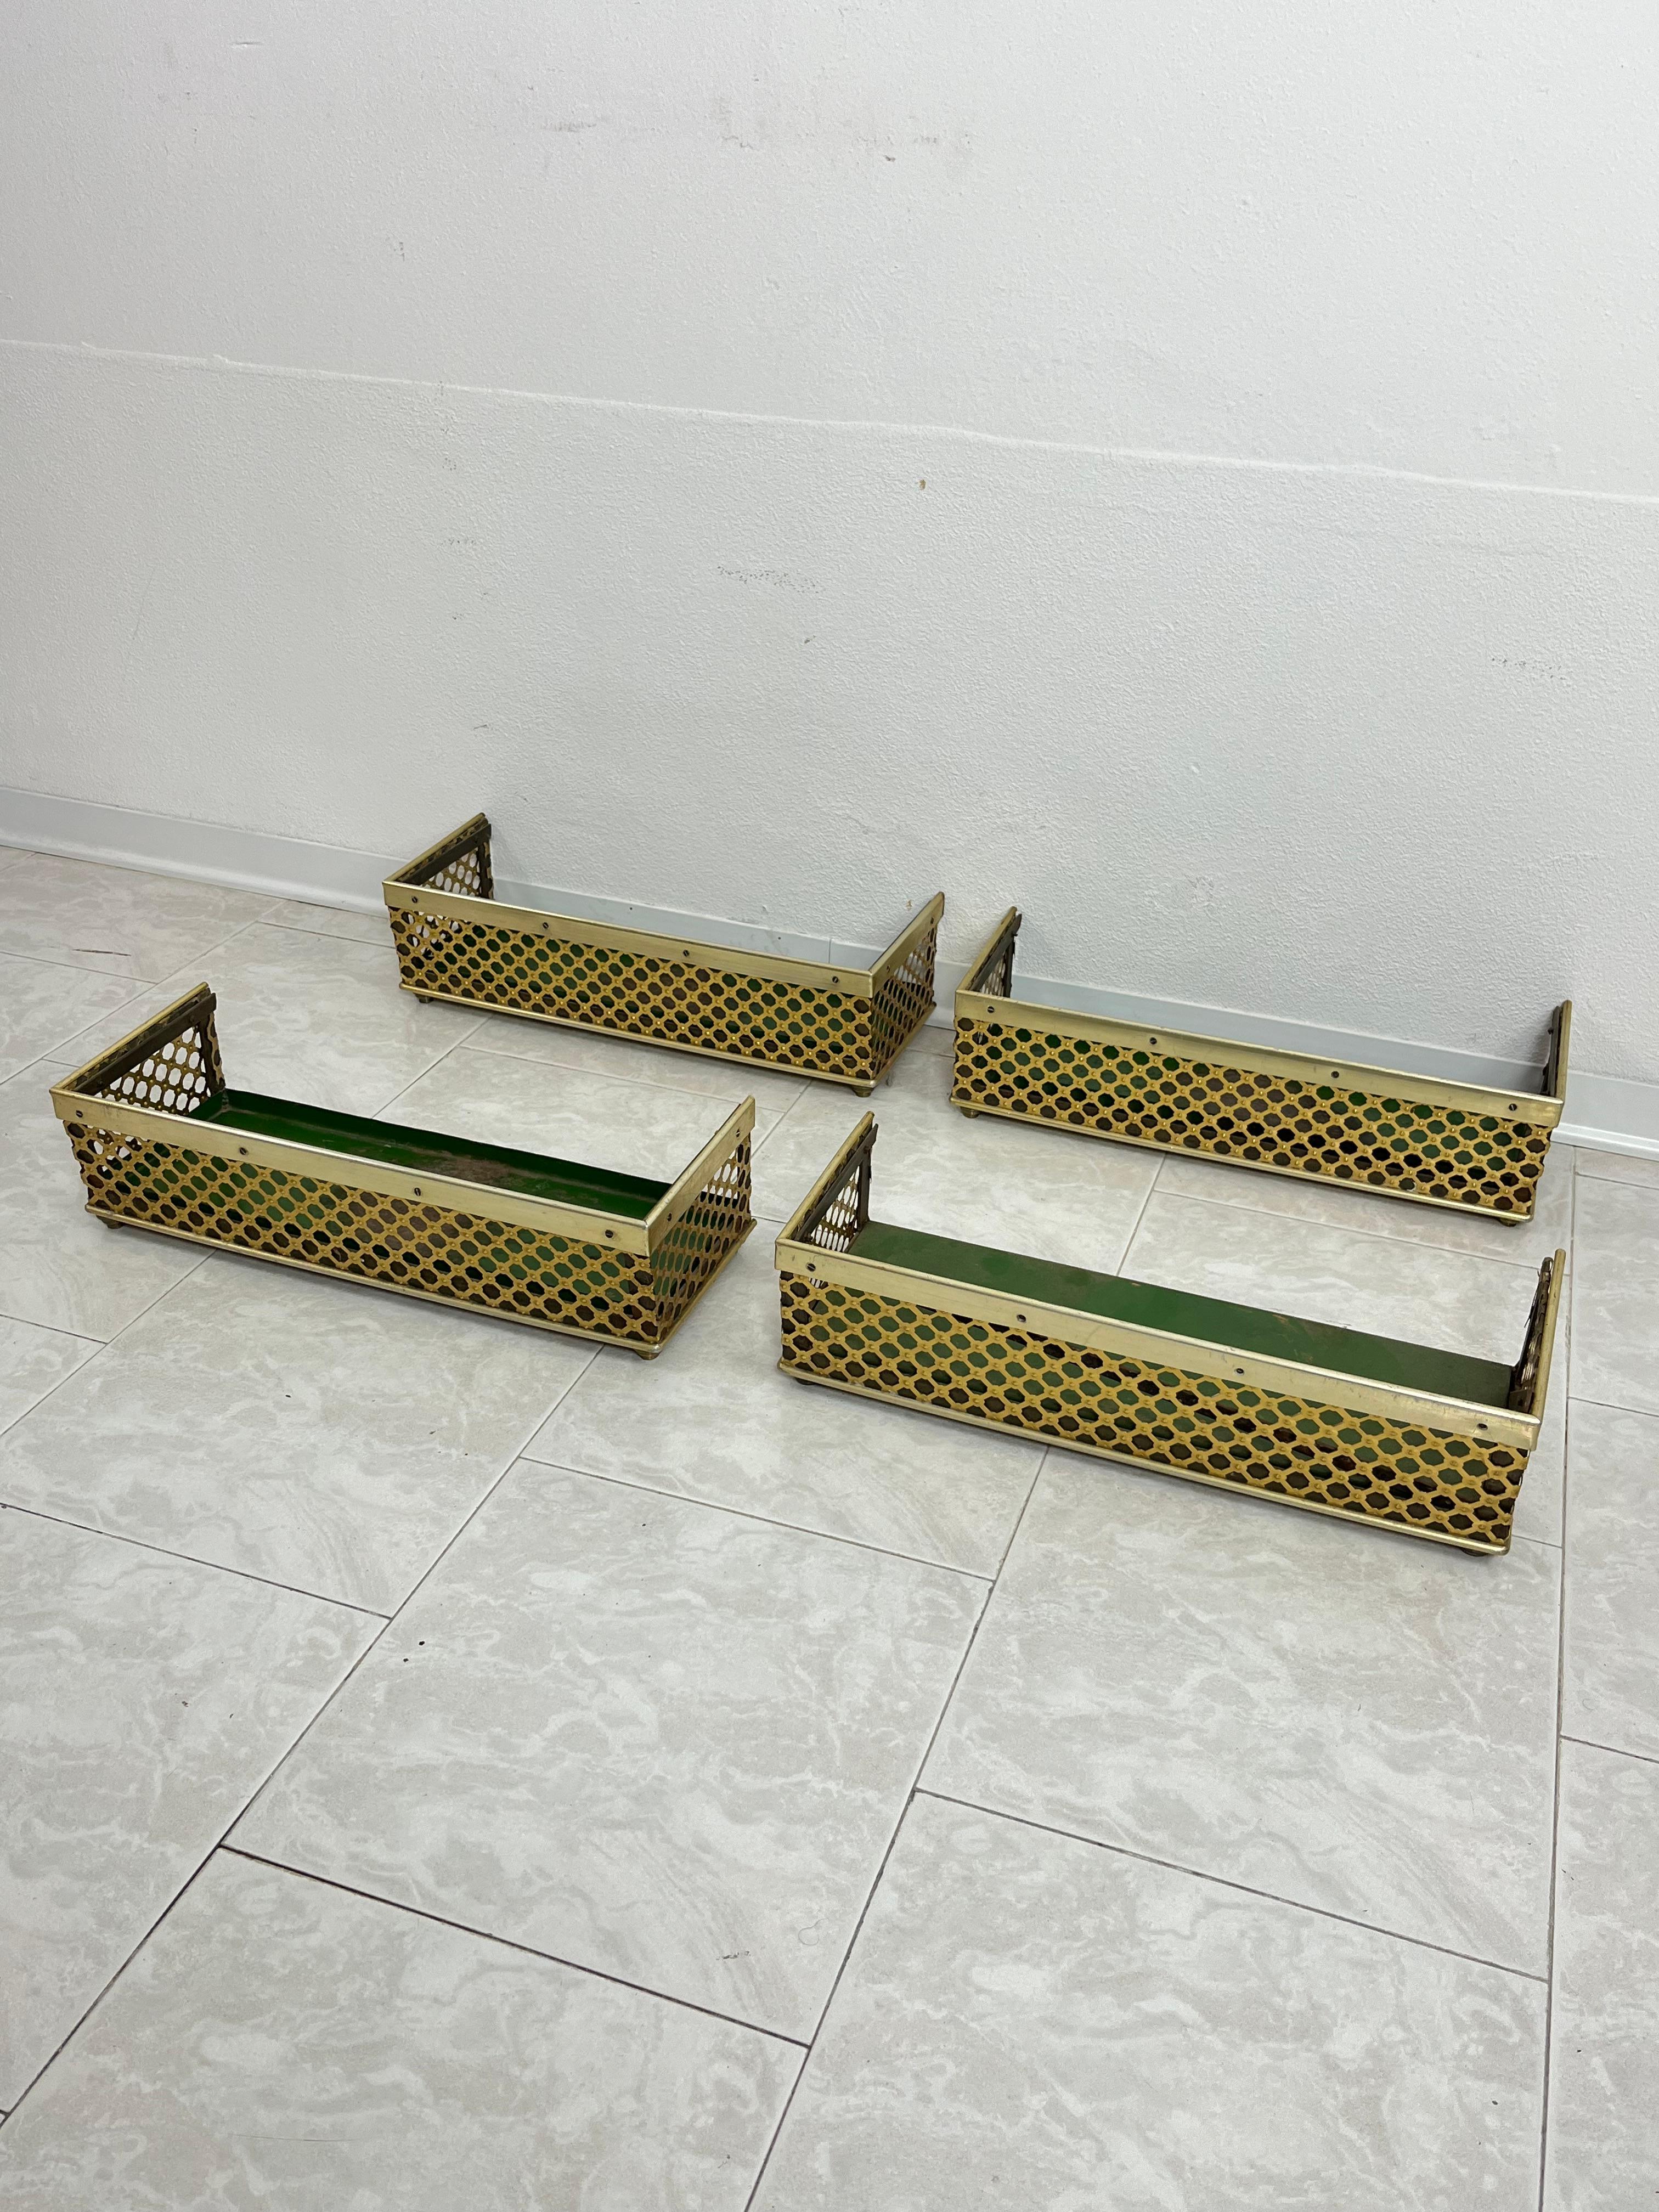 Set of 4 Mid-Century Brass-Covered Planters Attributed to Gio Ponti 1950s In Good Condition For Sale In Palermo, IT